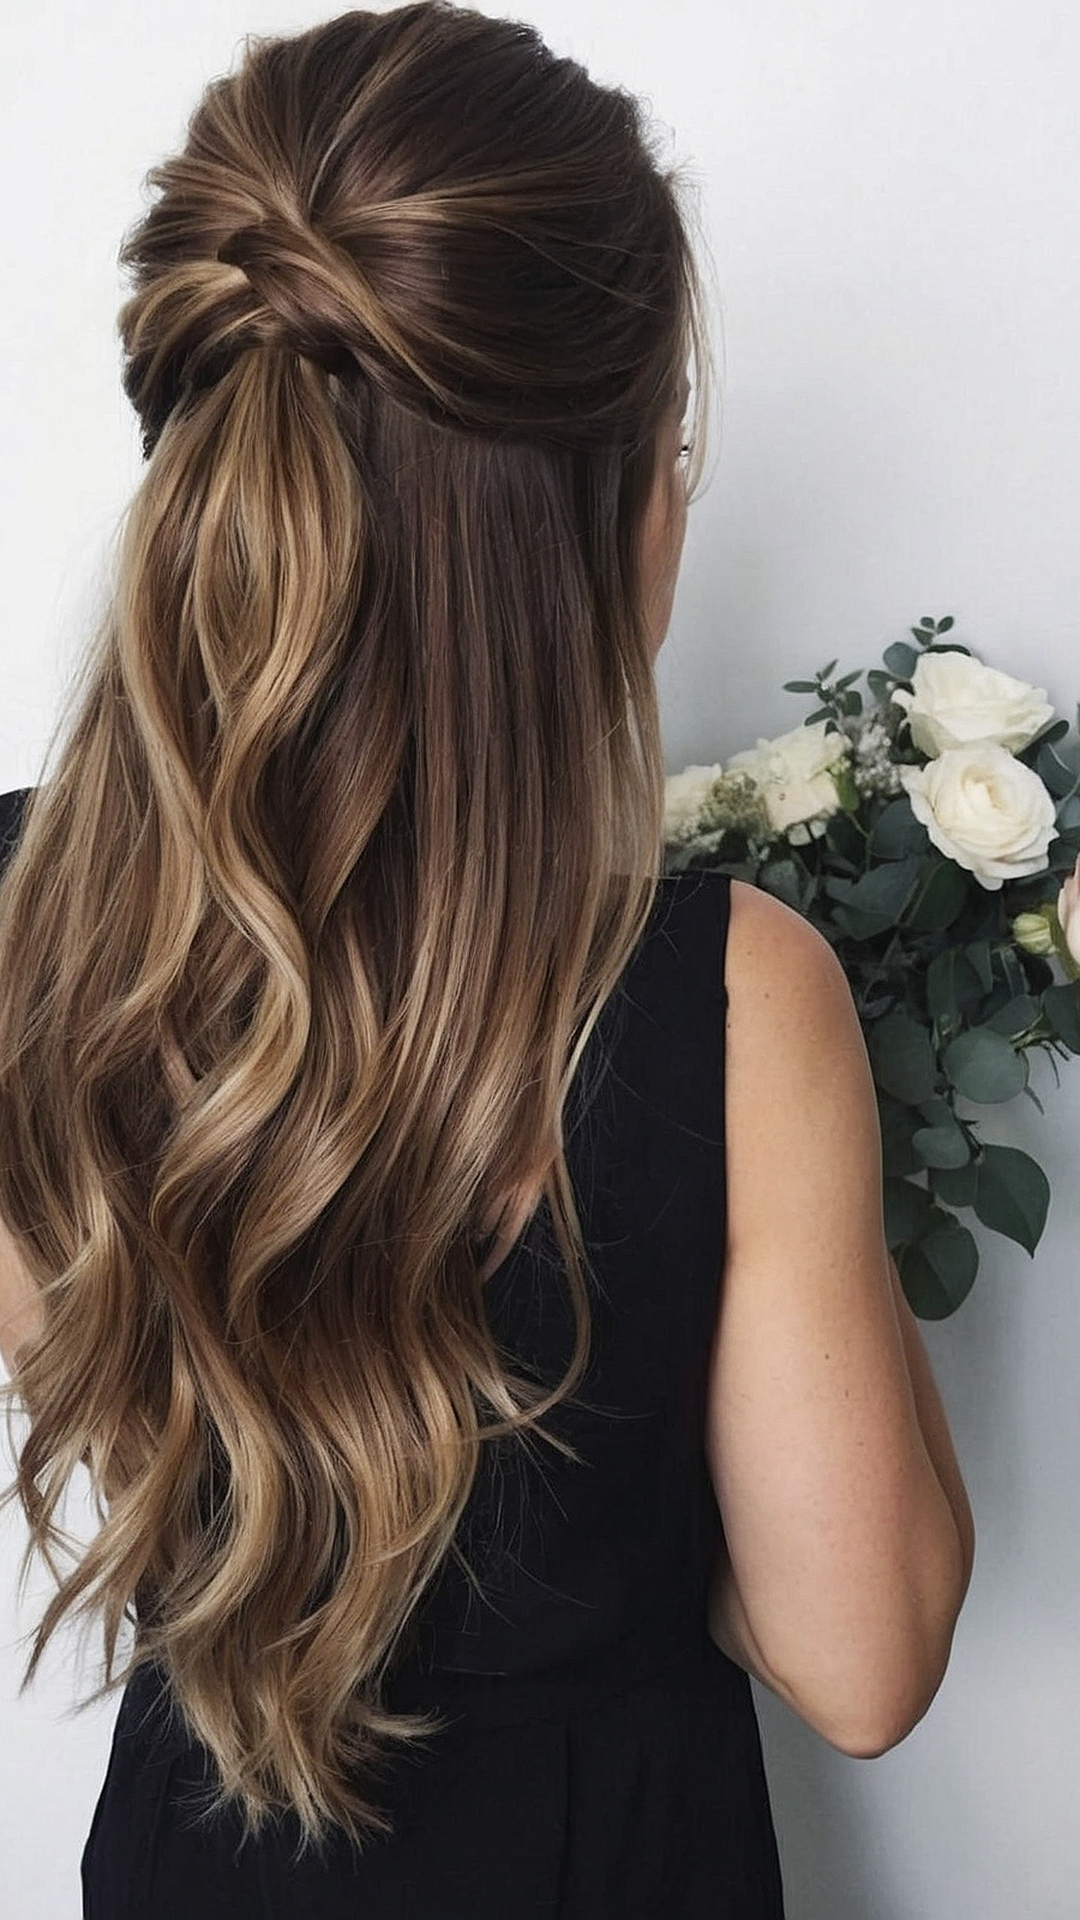 Tropical Twist: Summer Hair Ideas to Try